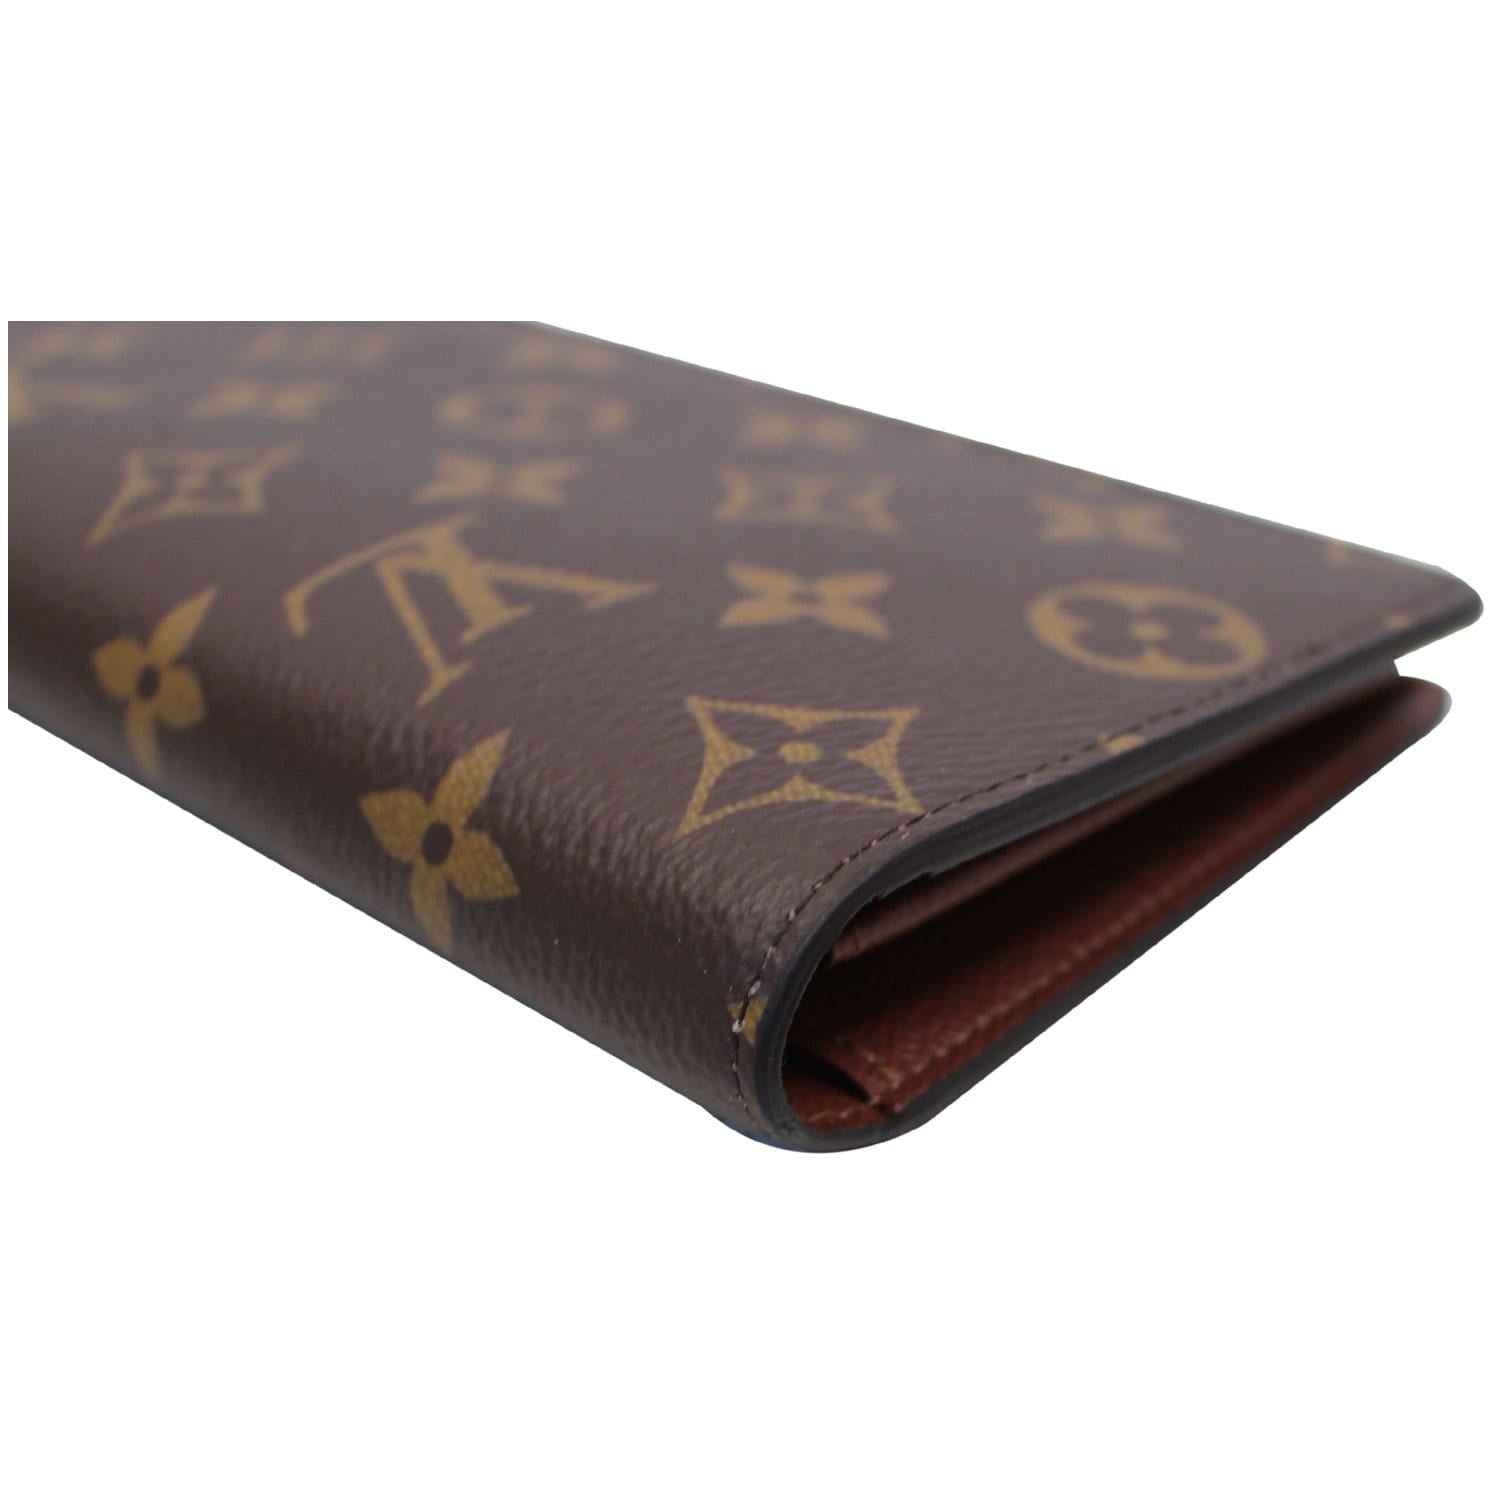 Louis Vuitton Brazza Wallet Blurry Monogram Brown in Coated Canvas